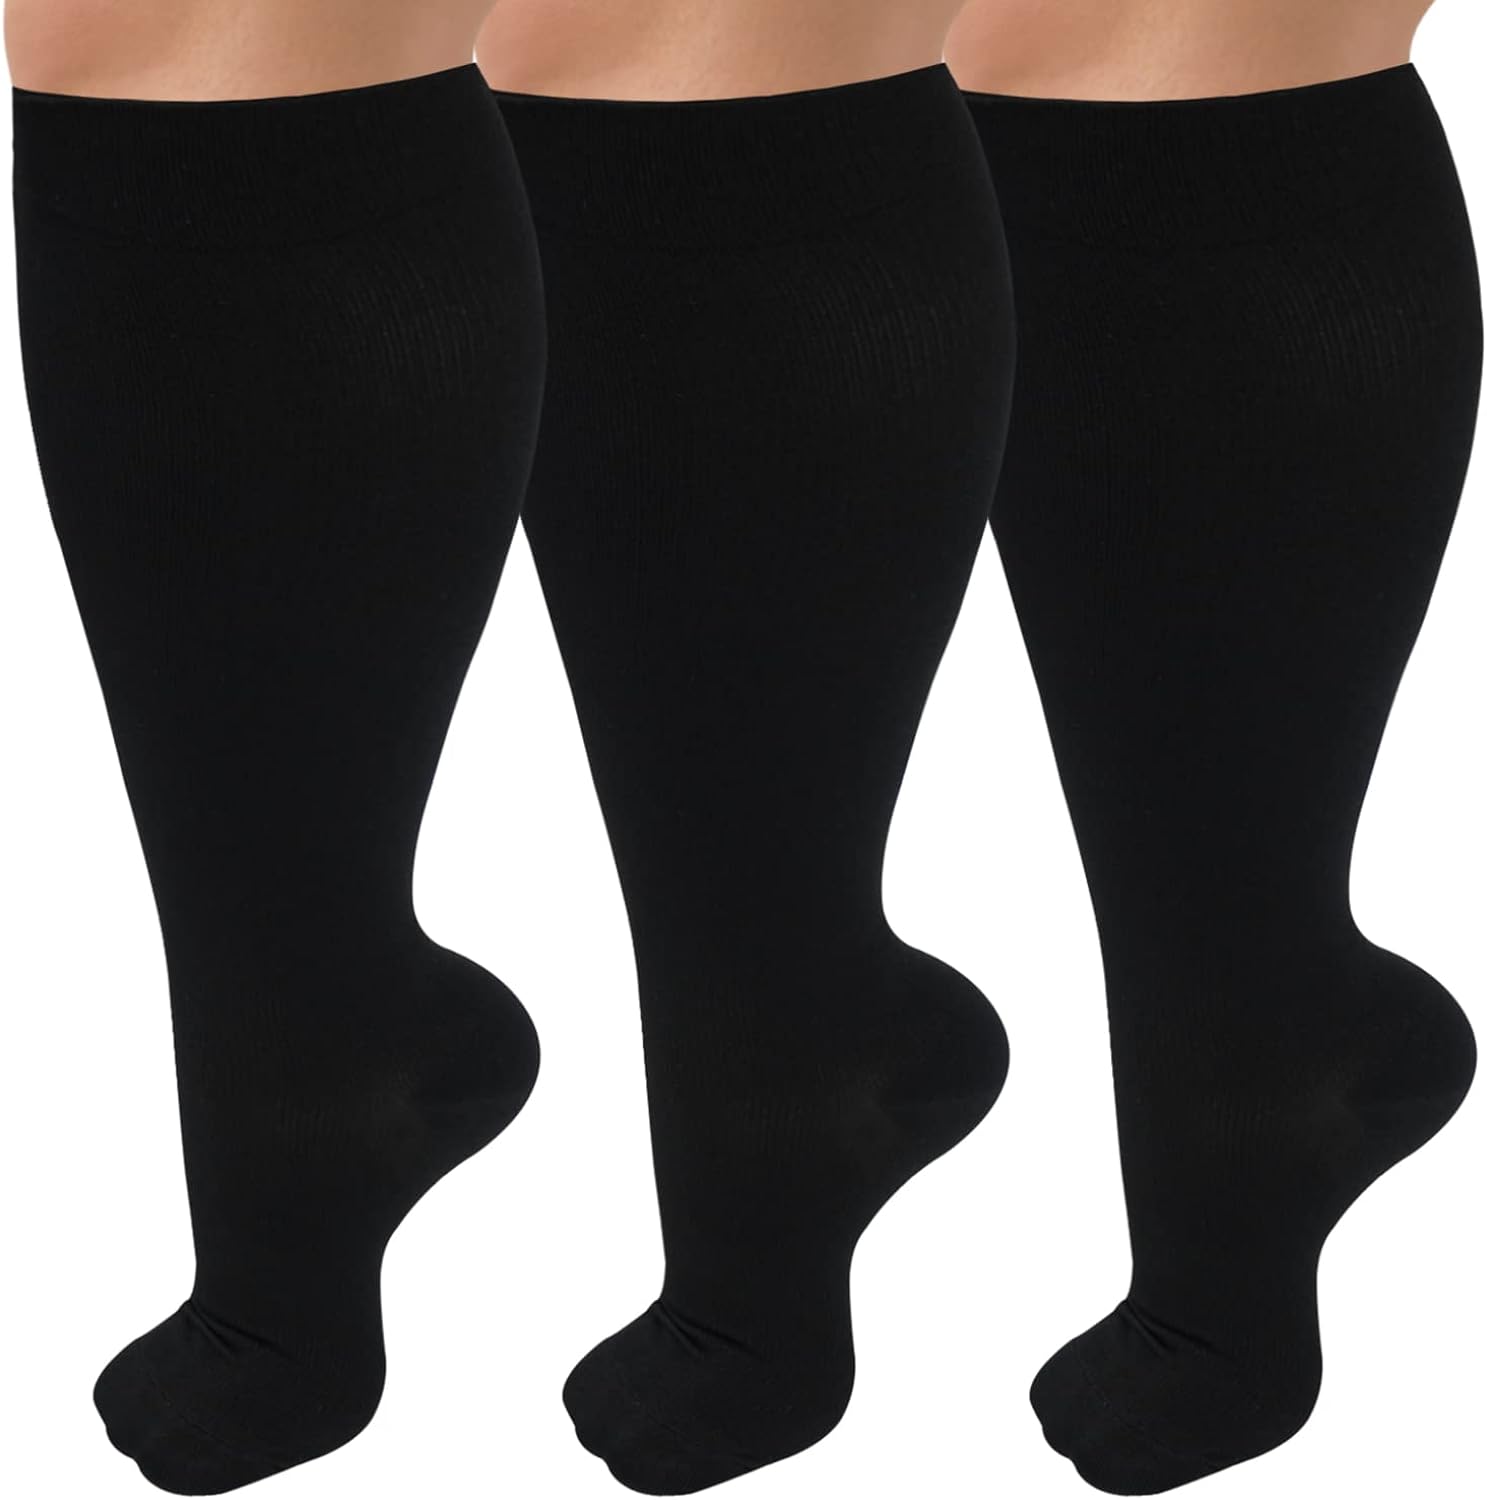 3 Pack Plus Size Compression Socks for Women & Men, 20-30 mmhg Extra Wide Calf Knee High Stockings for Circulation Support